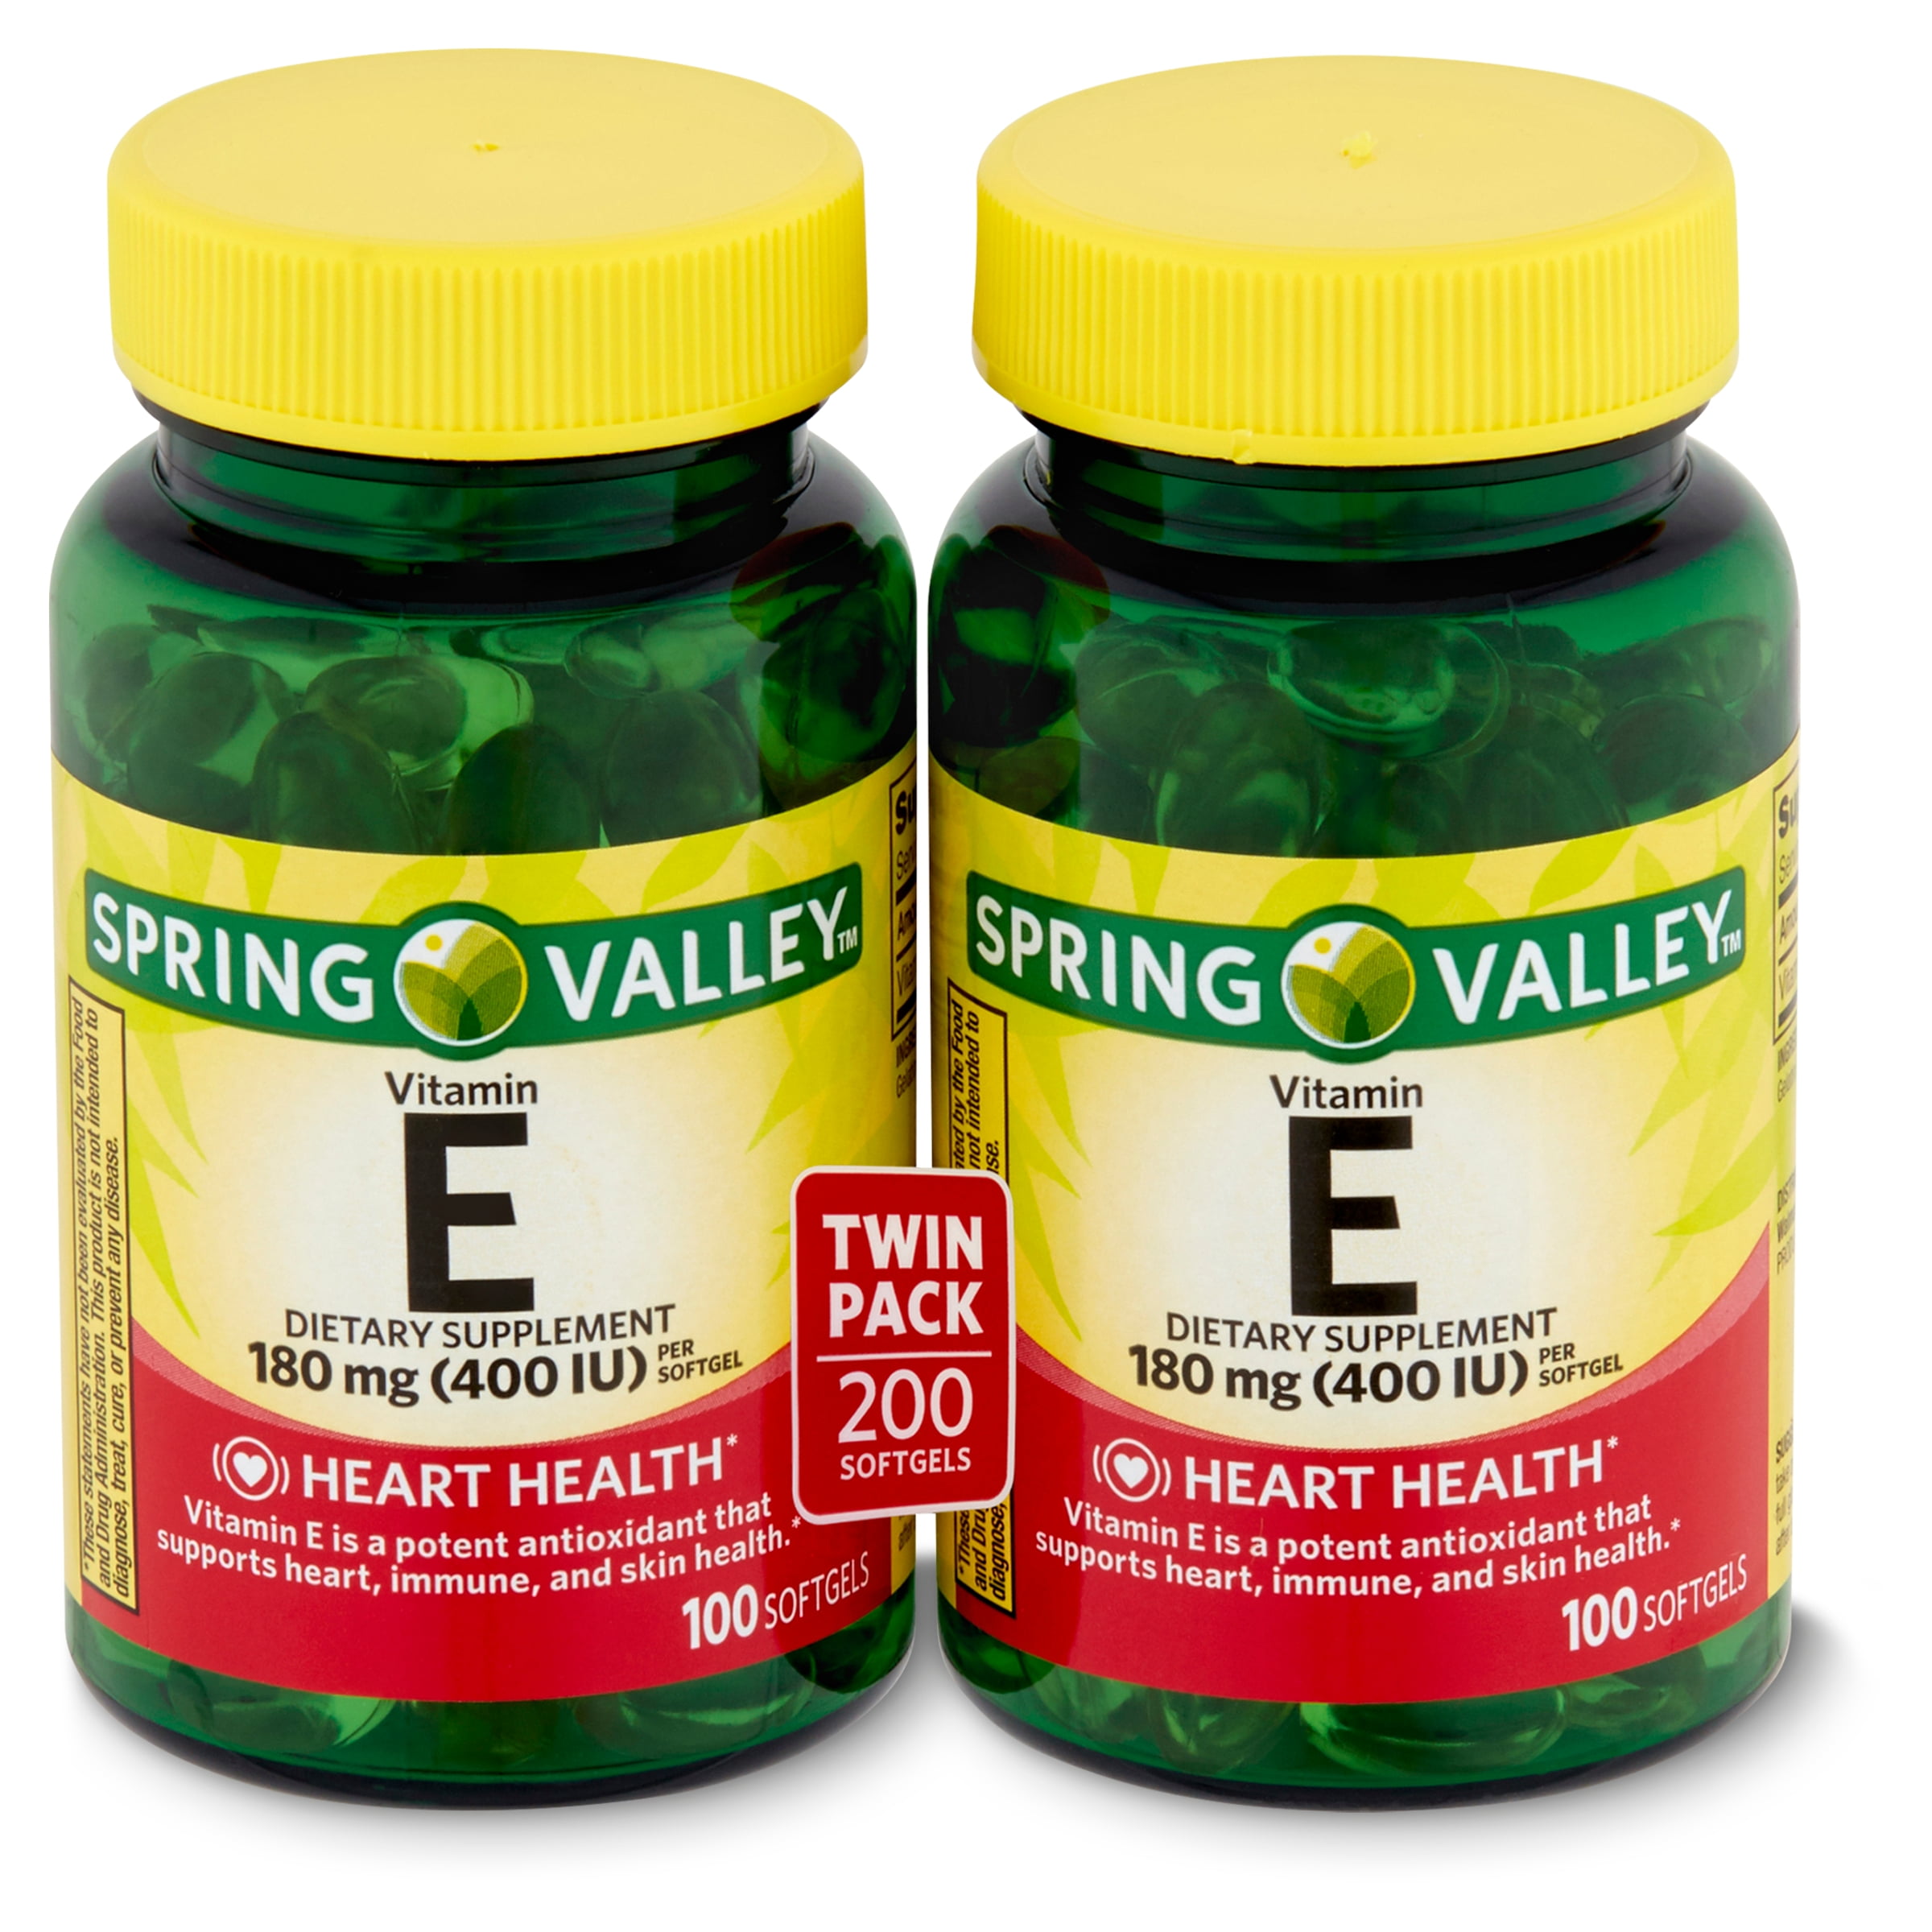 Spring Valley Vitamin E Dietary Supplement Twin Pack 180 Mg 0 Count Walmart Com